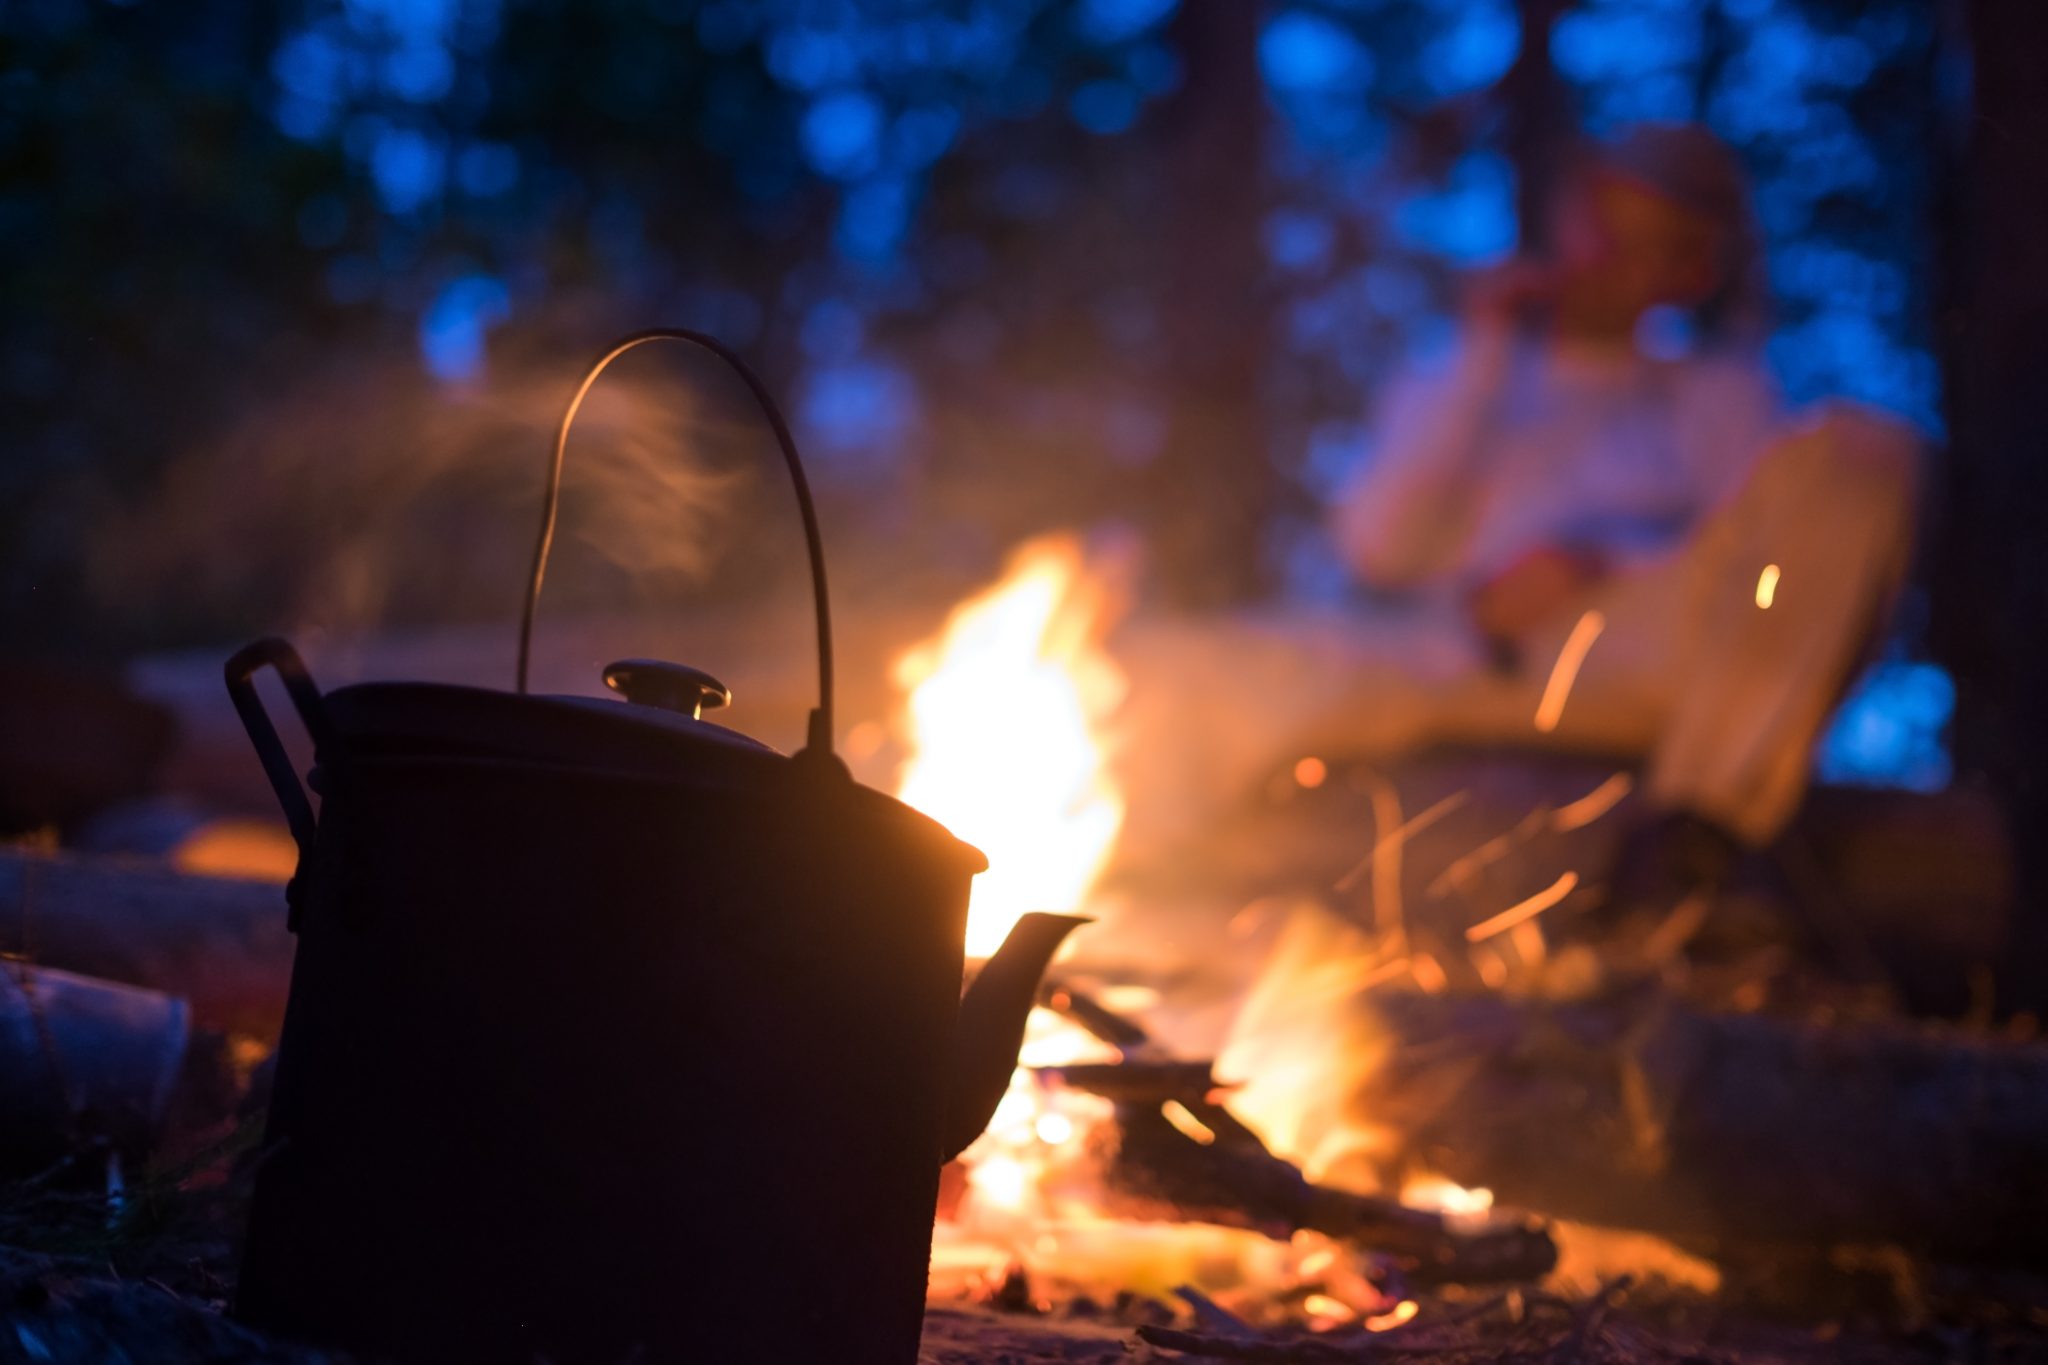 Wood Fires Might Be Fun, But Here’s Why They’re Not Good For Your Health